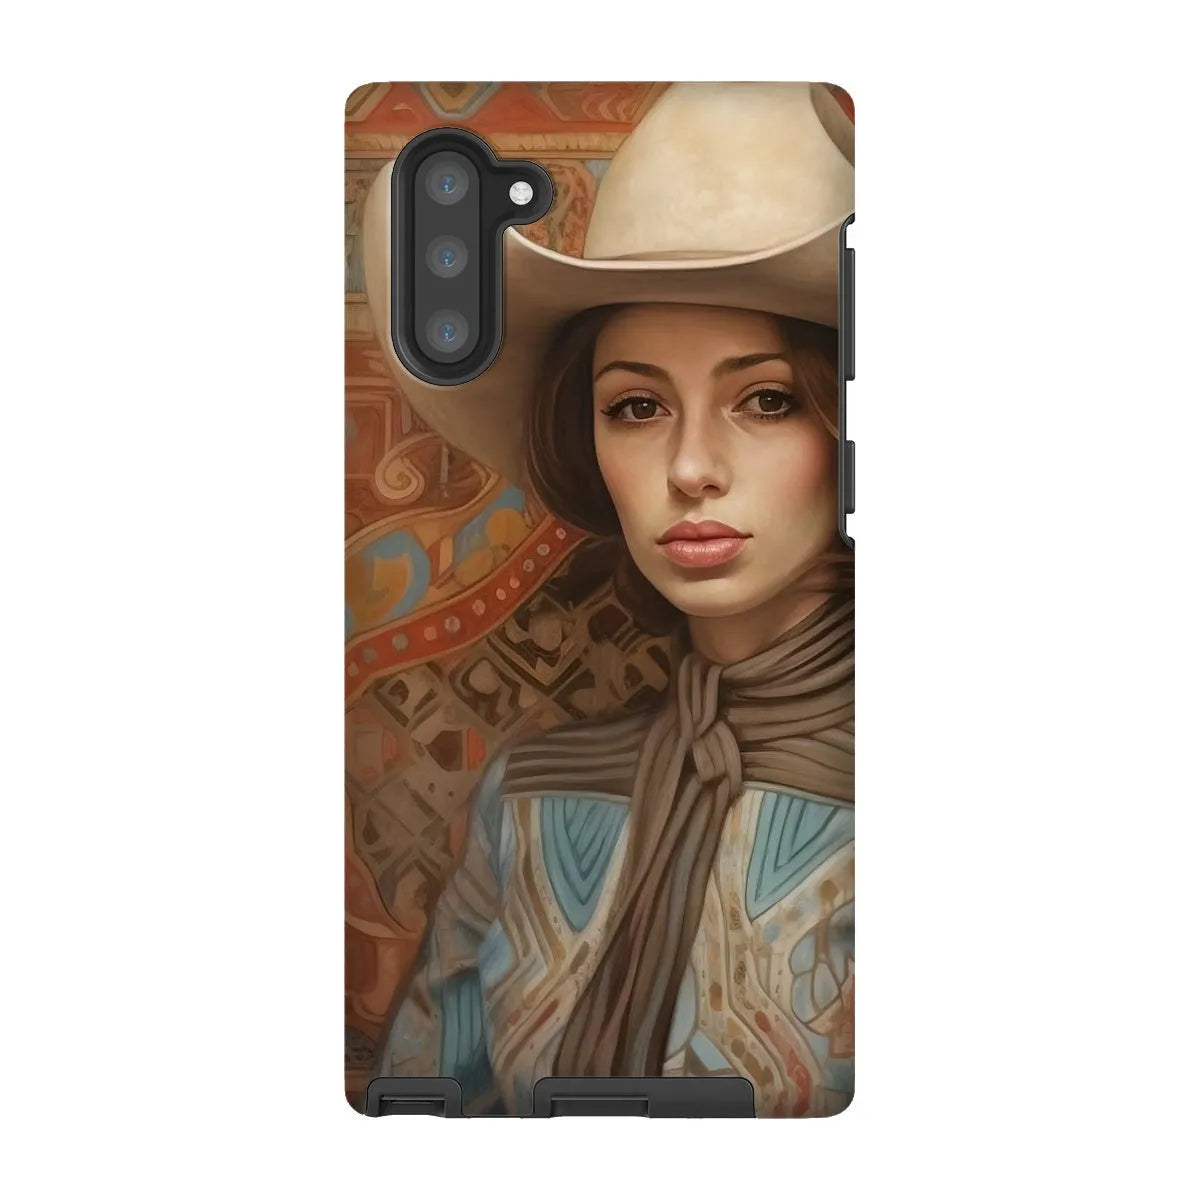 Anahita The Lesbian Cowgirl - Sapphic Art Phone Case - Samsung Galaxy Note 10 / Matte - Mobile Phone Cases - Aesthetic